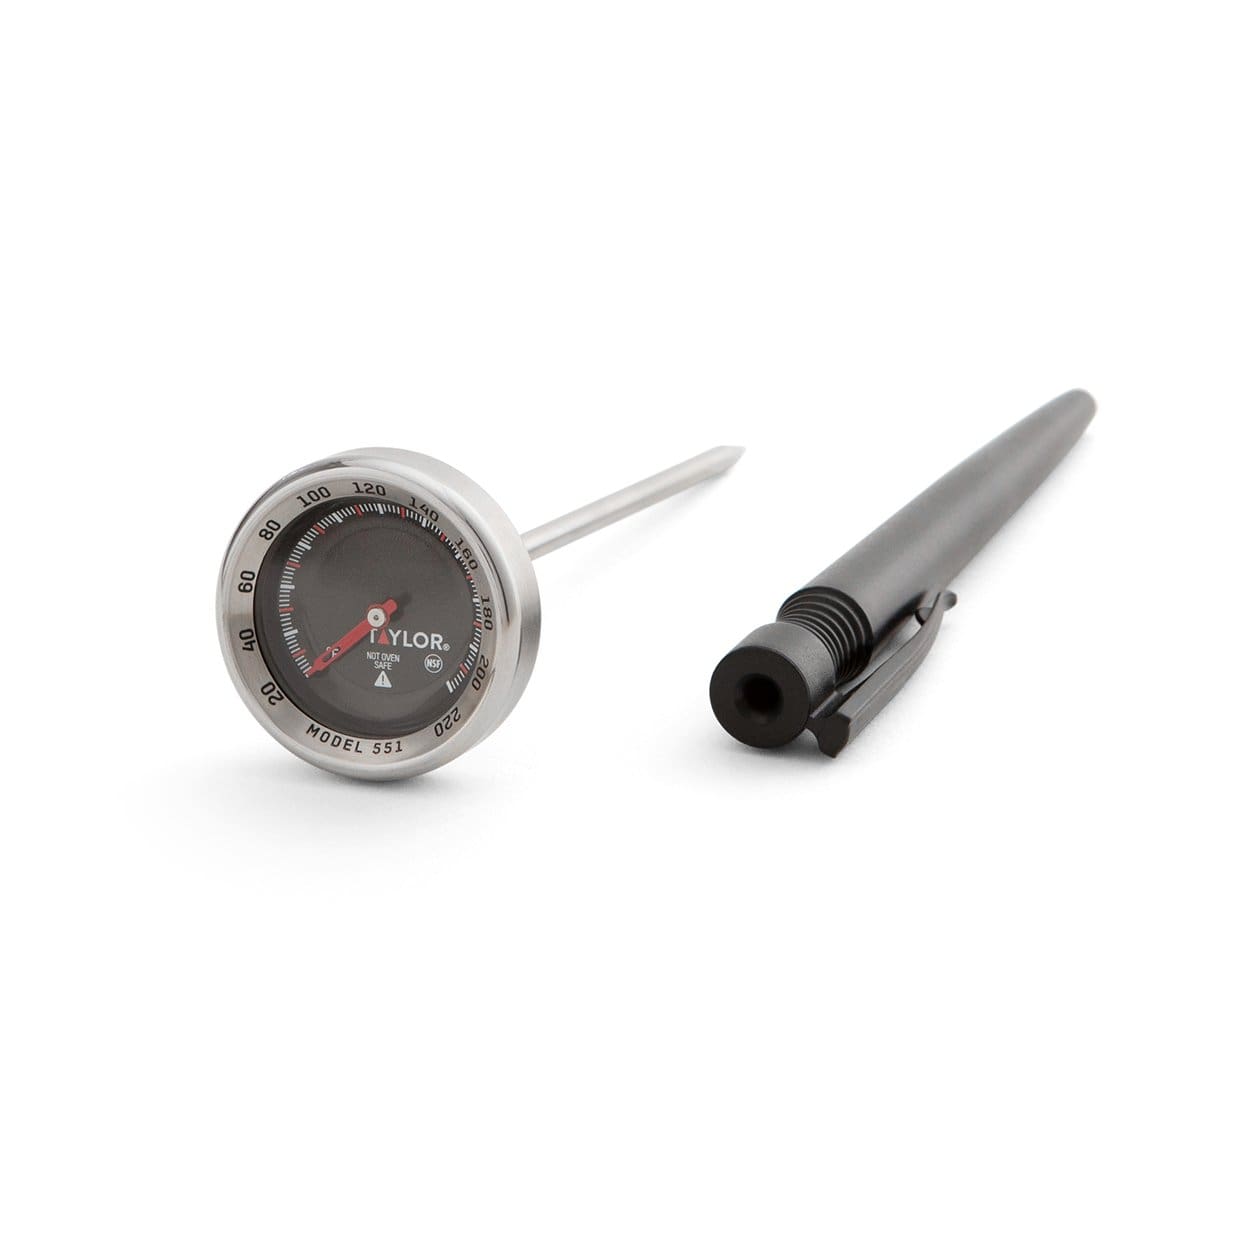 Taylor Instant Read Stainless Steel Food Thermometer